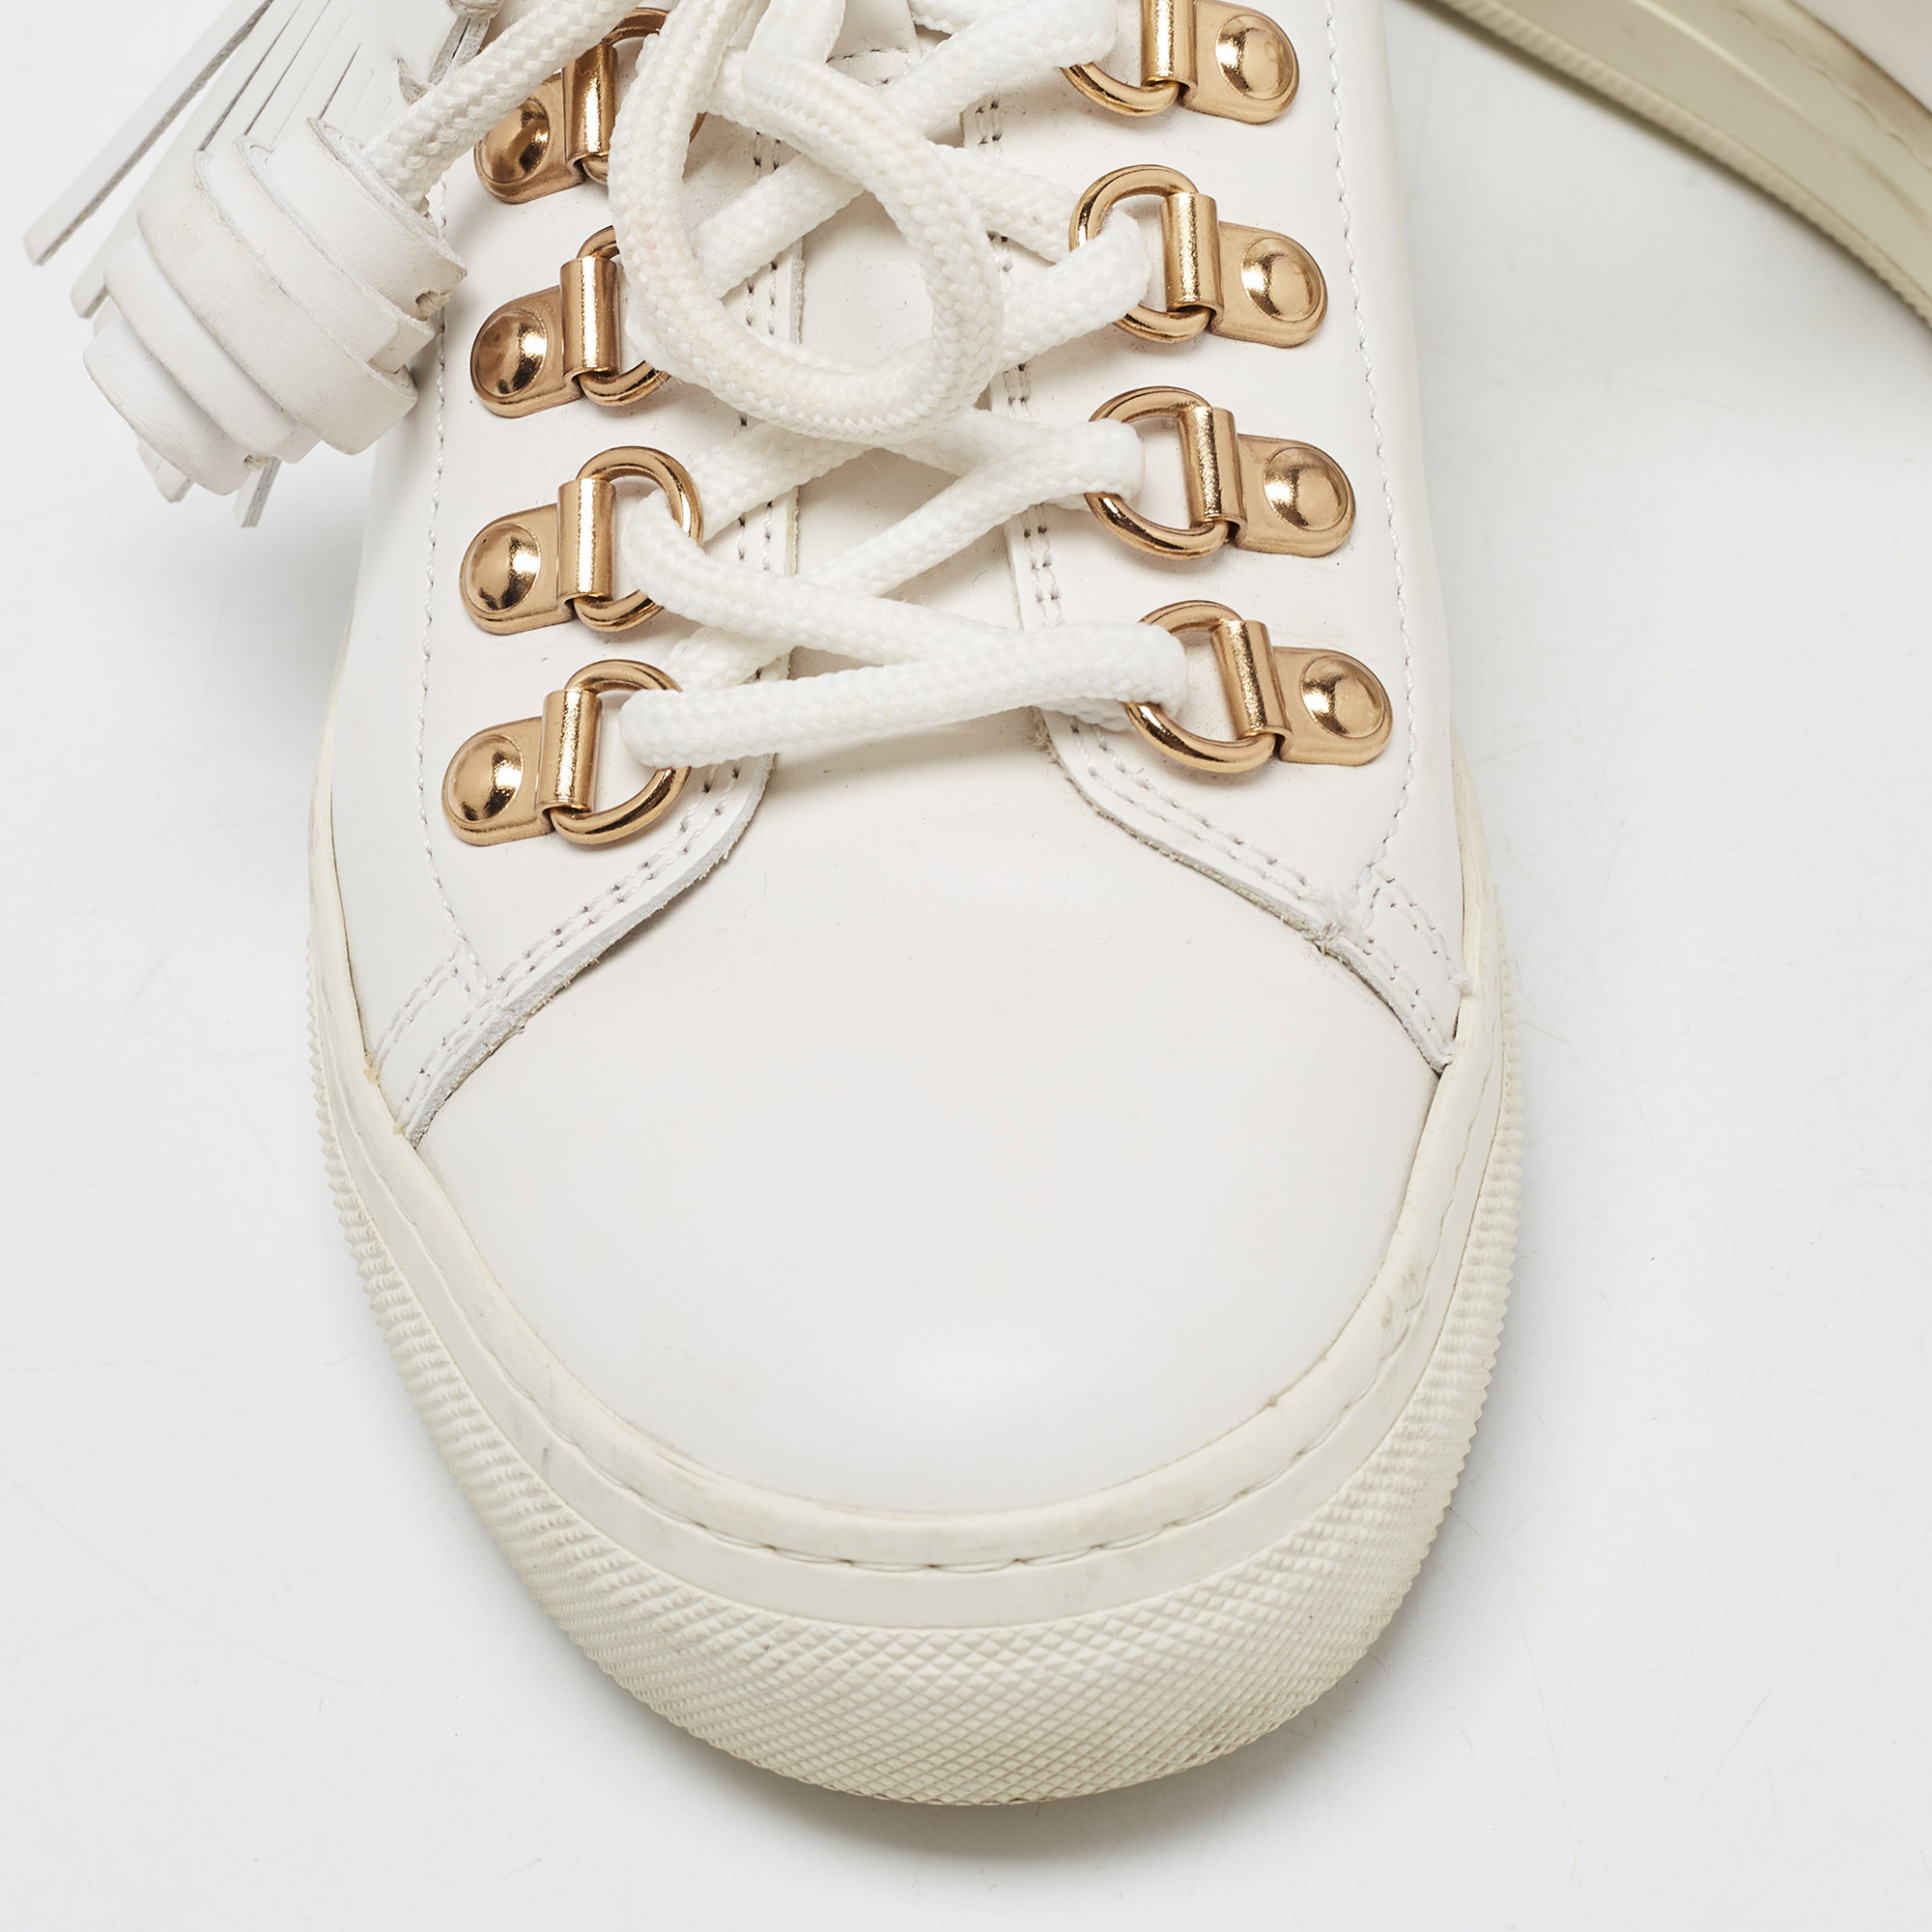 Tod's White Leather Tassel Lace Up Sneakers Size 34.5